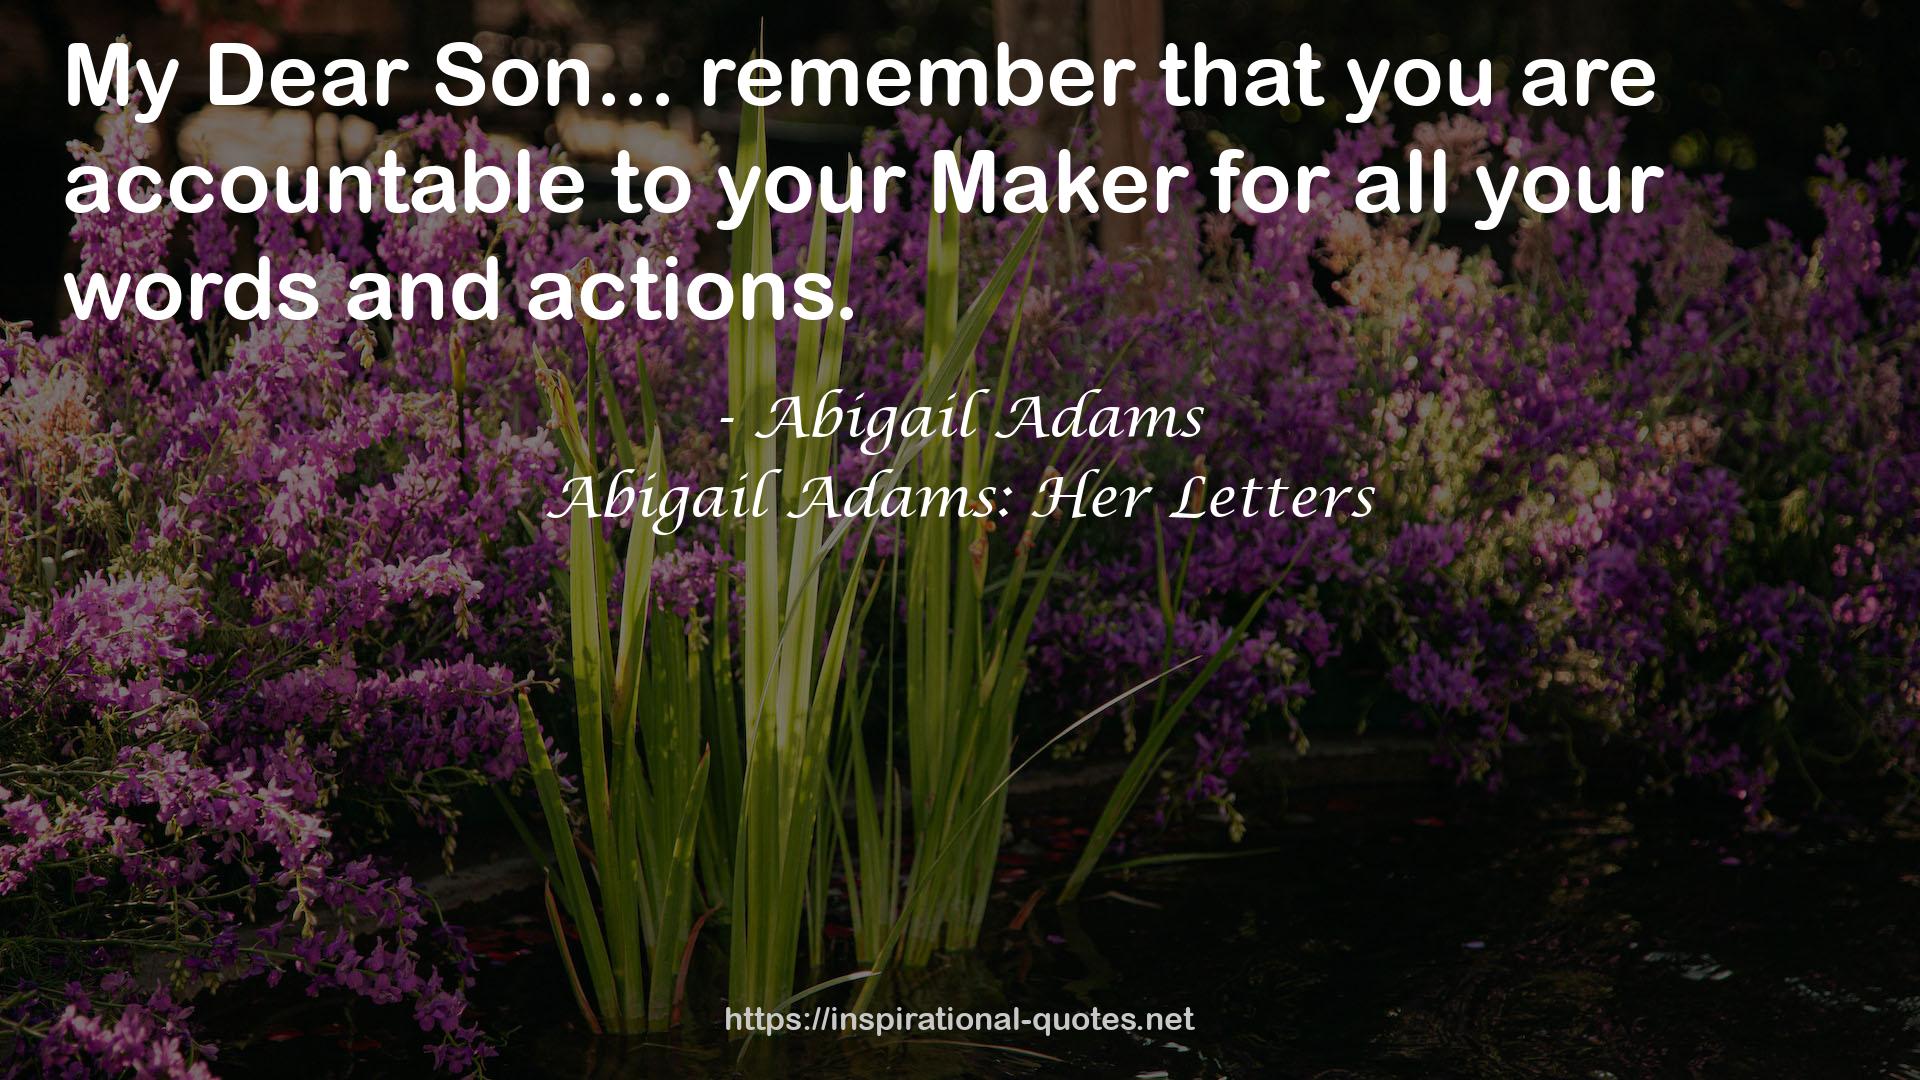 Abigail Adams: Her Letters QUOTES